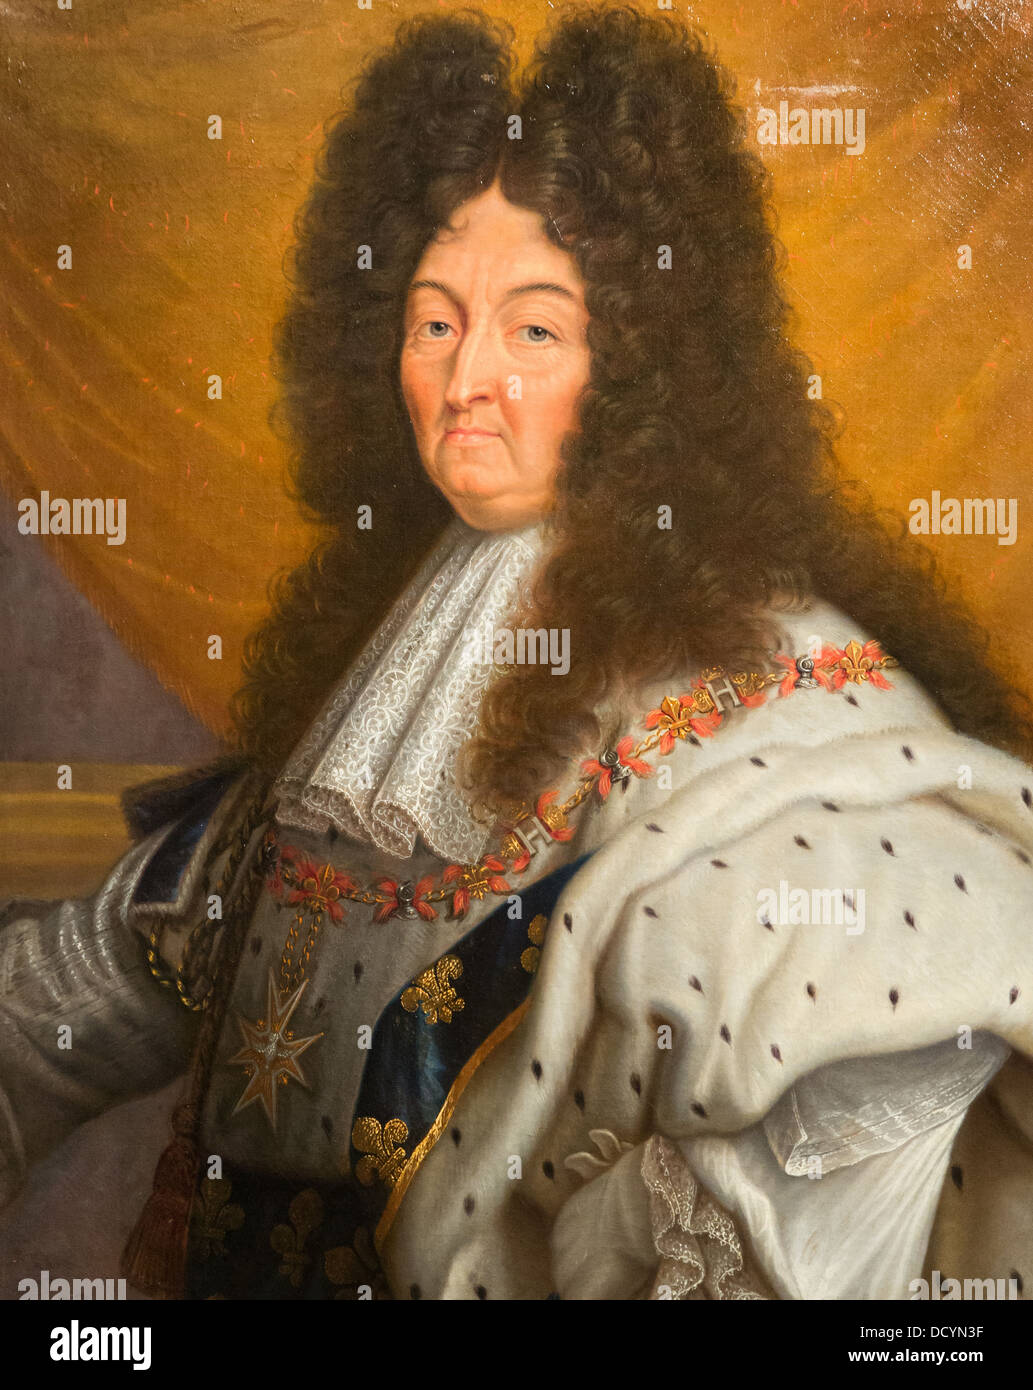 18th century  -  Louis XIV King of France - Andry after Hyacinthe Rigaud 1705 - Musée de l'armée oil on canvas Stock Photo